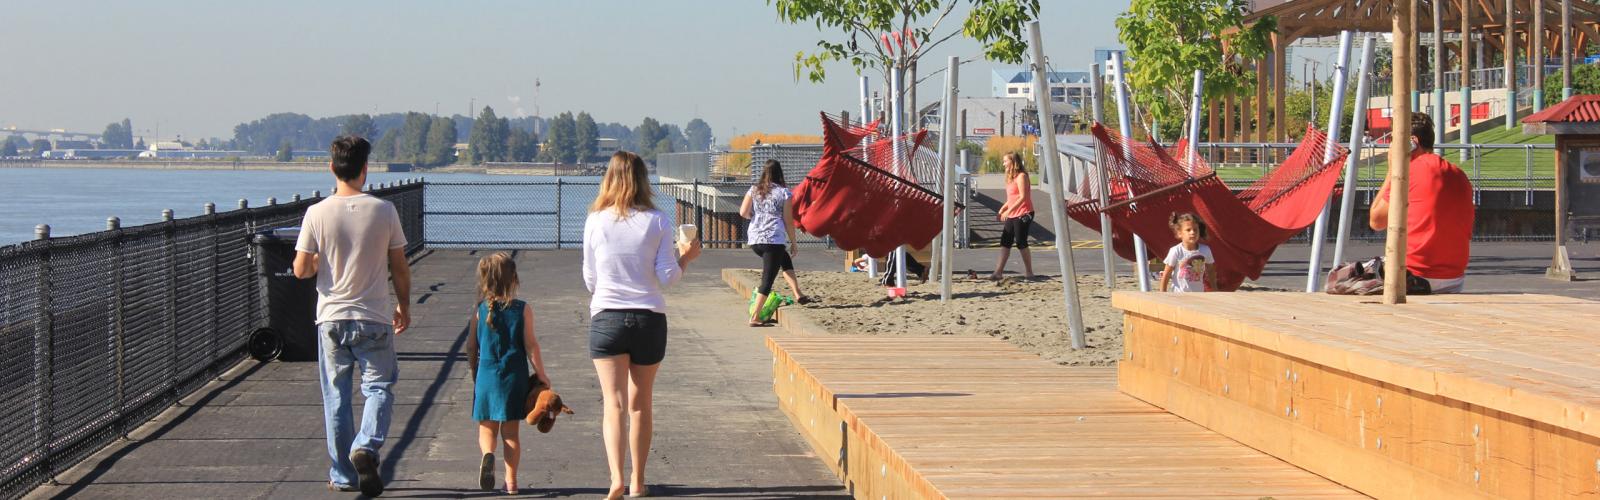 A young family walks along the pier in New Westminster Park